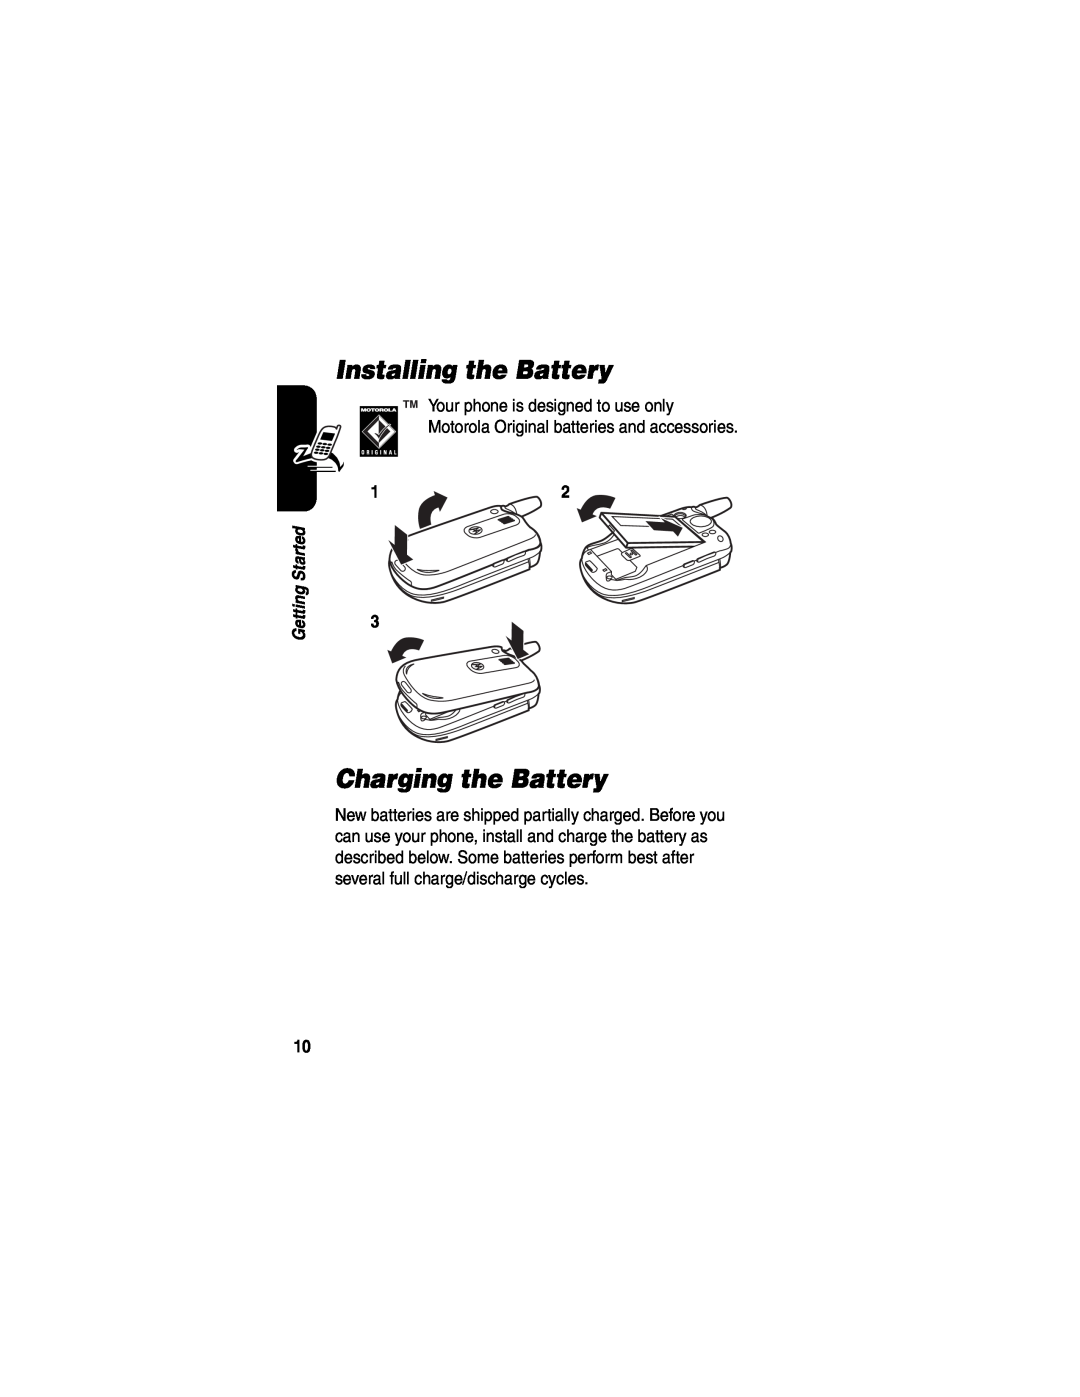 Motorola V635 manual Installing the Battery, Charging the Battery, Your phone is designed to use only, Getting Started 